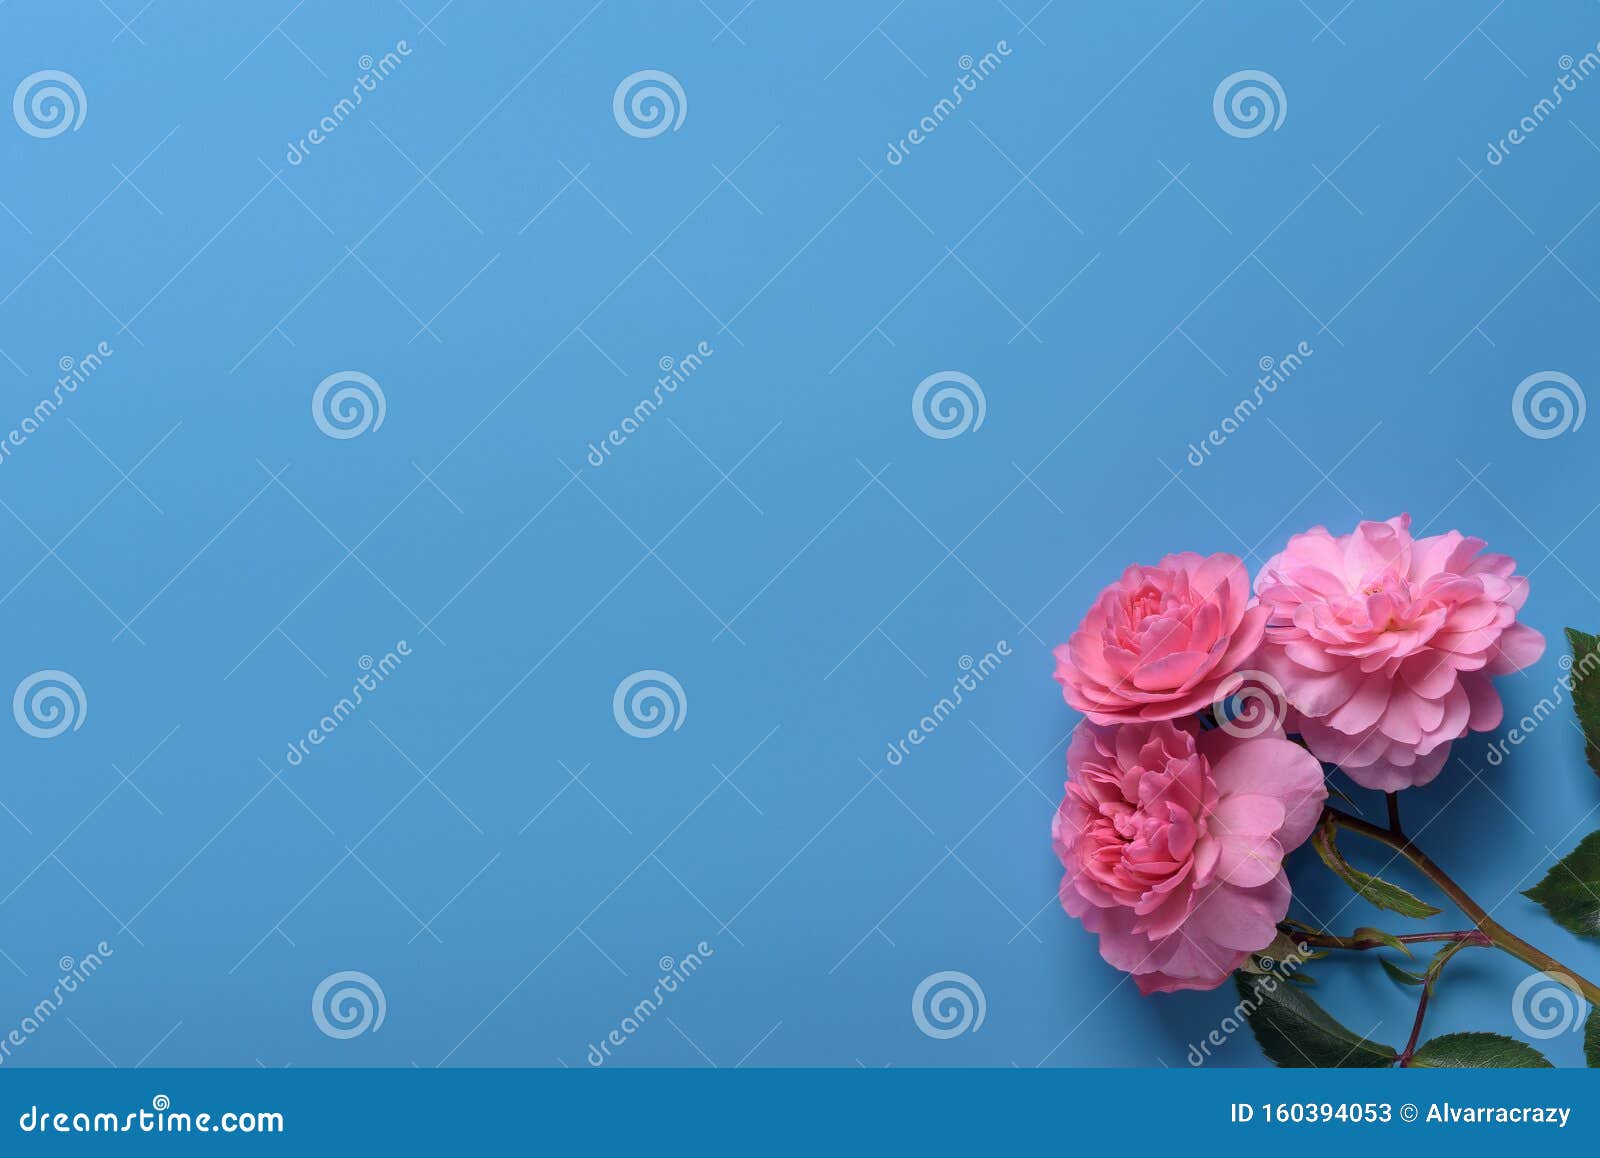 Pink Rose Blue Background Stock Photos - Download 39,175 Royalty Free ...